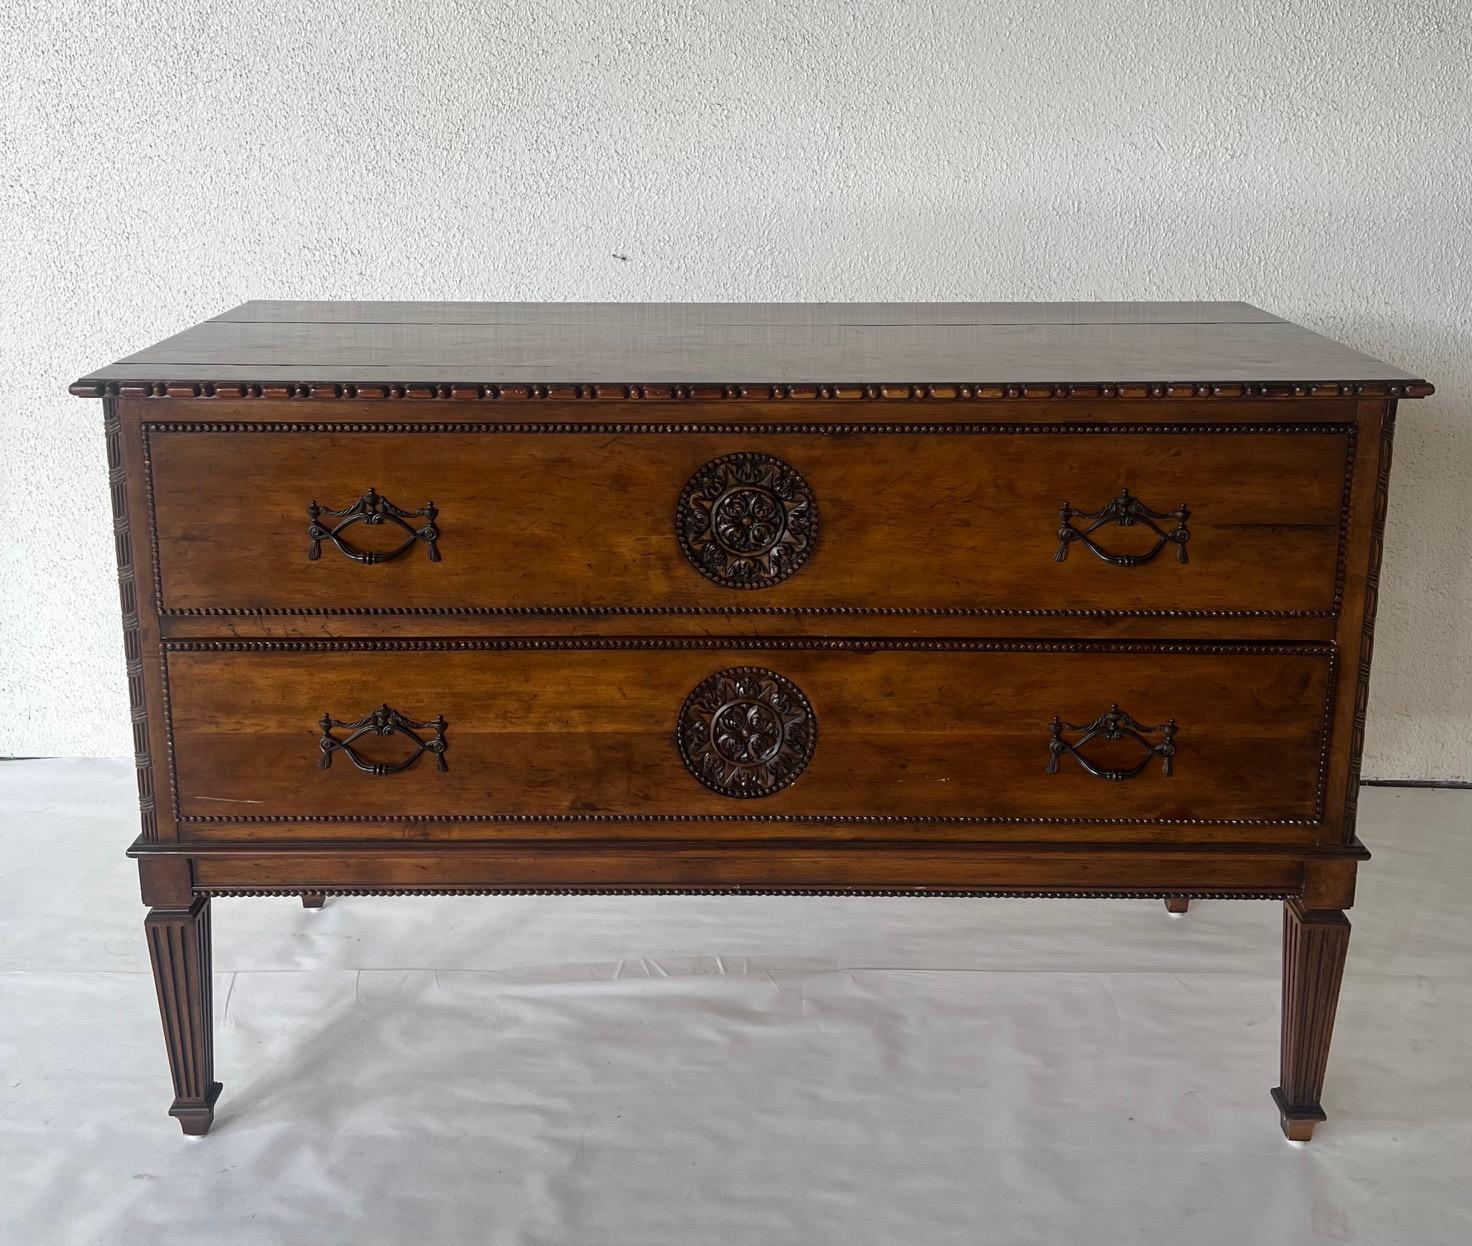 Imported English Chest of drawers with center carved medallions on each drawer. Carved border surround with original hardware. Very detailed chest.